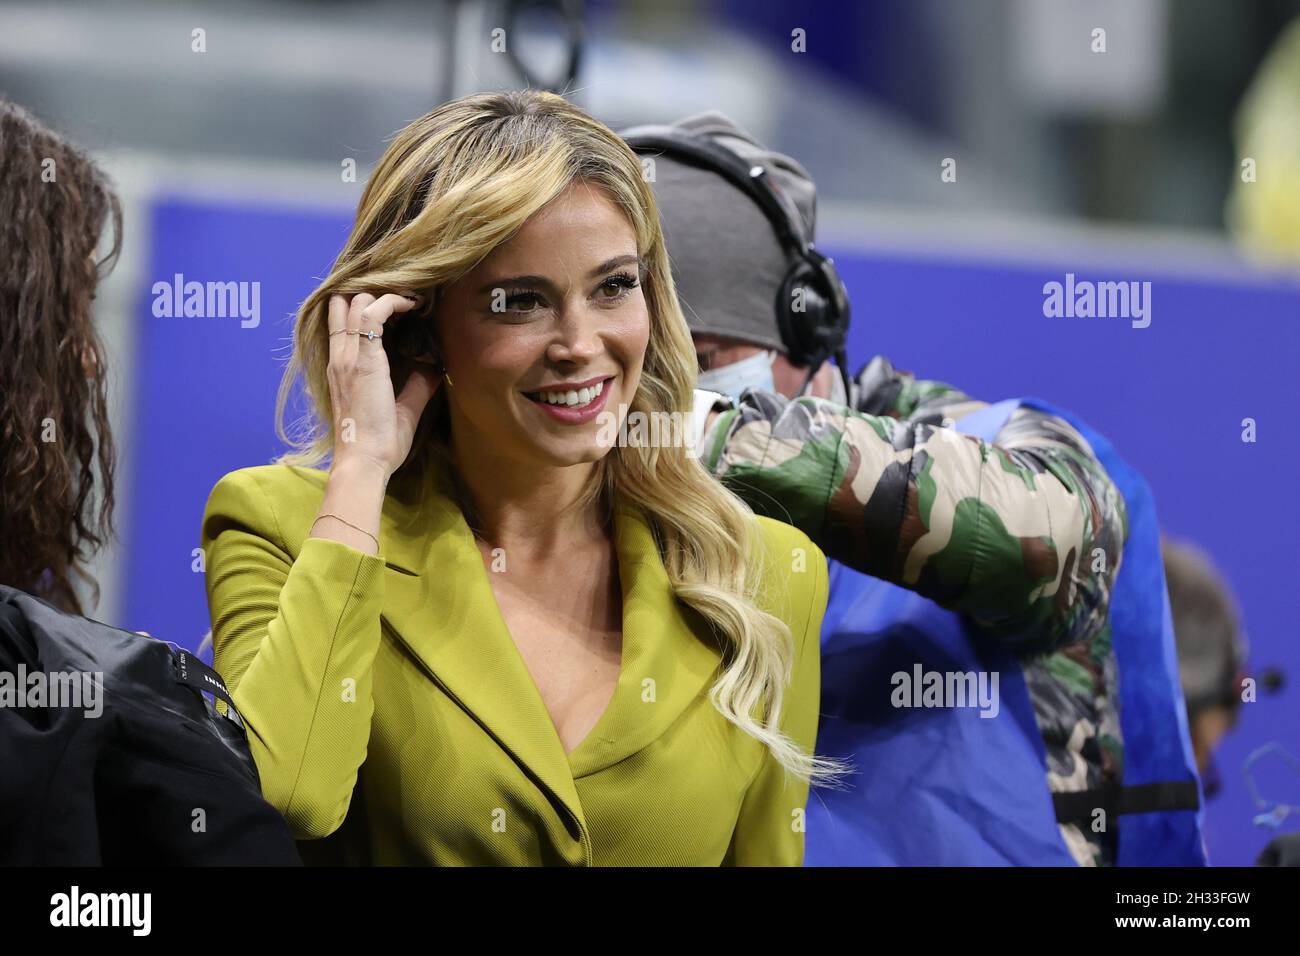 Diletta Leotta Of Dazn Italia During The Serie A 21 22 Football Match Between Fc Internazionale And Juventus Fc At Giuseppe Meazza Stadium Milan I Stock Photo Alamy